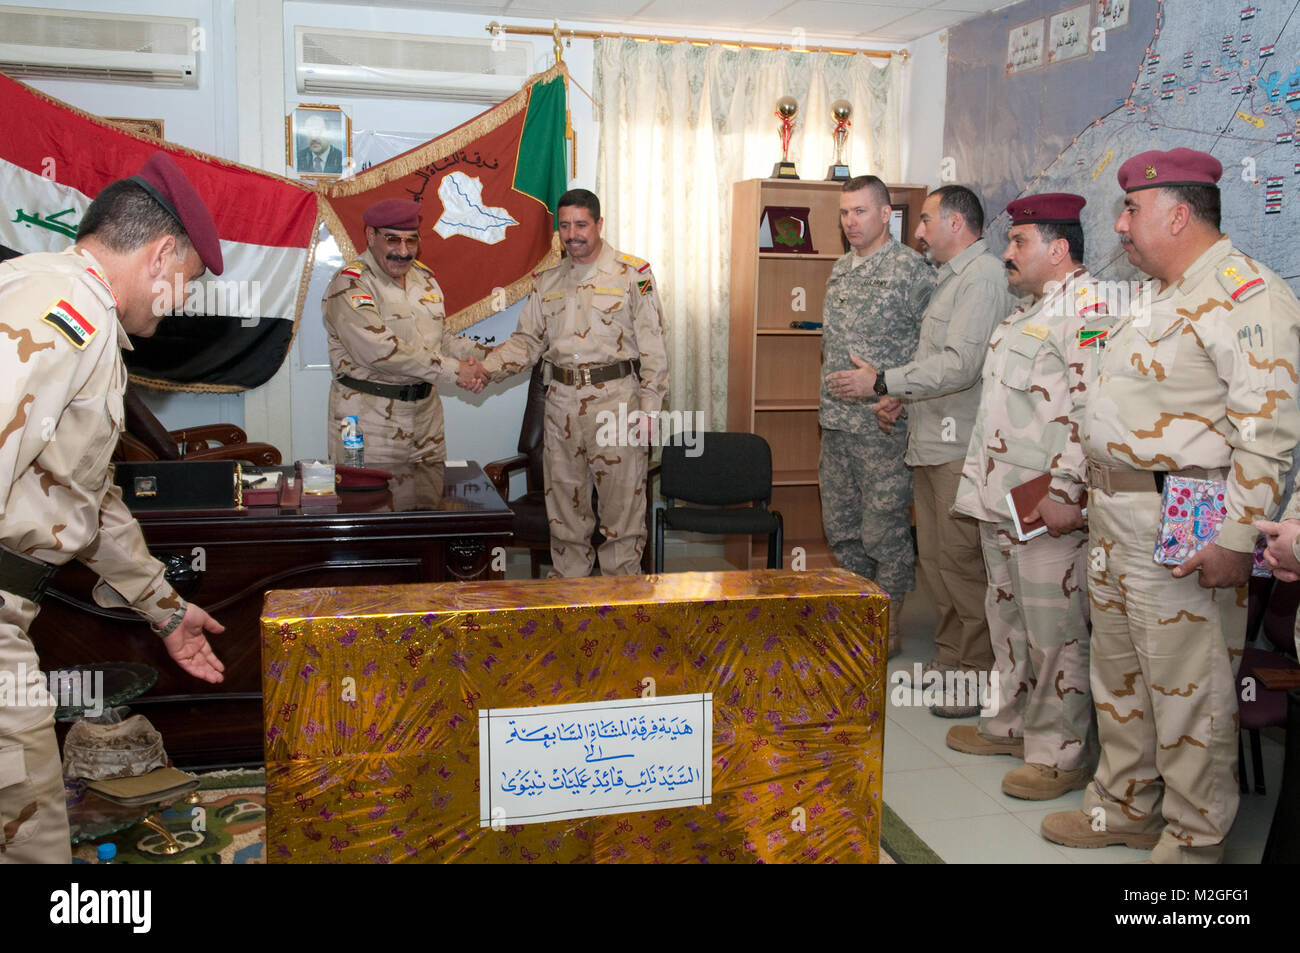 Staff Maj. Gen. Abdullah Muhammad Baider Aljubouri, outgoing commander of the 7th Iraqi Army Division, shakes the hand of his replacement, staff Brig. Gen. Ismaeel Khalif al-Khalifawi, before a gift from the 7th Division April 1, 2010, Camp Mejid, Iraq. Abdullah commanded the 7th Division during some of Al Anbar province’s most dramatic security gains since the 2003 invasion of Iraq. (U.S. Army photo by Sgt. Michael J. MacLeod, 1/82 AAB, USD-C) Shaking hands with his replacement by 1st Armored Division and Fort Bliss Stock Photo